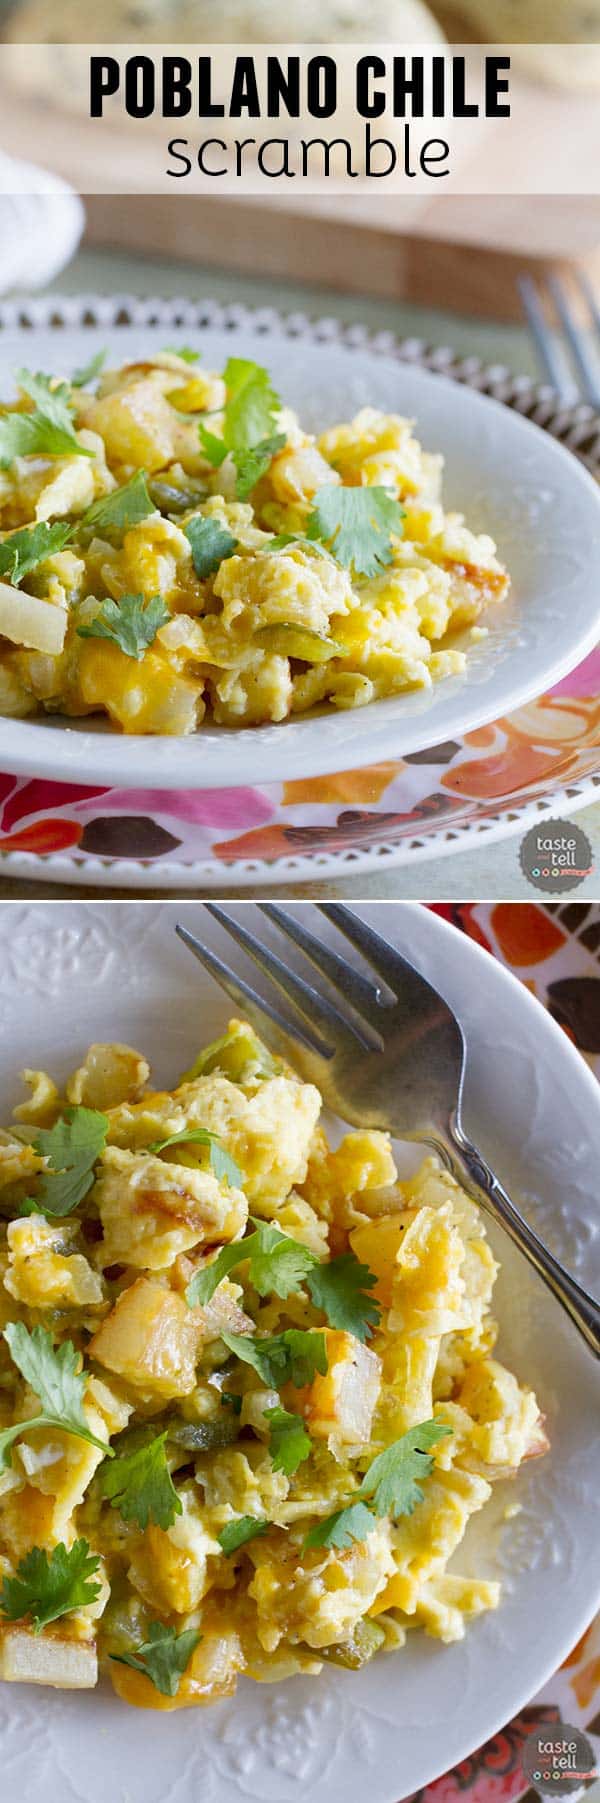 The perfect breakfast for dinner recipe, this Poblano Chile Scramble has eggs and potatoes cooked with freshly roasted chiles. A great taste of the southwest!